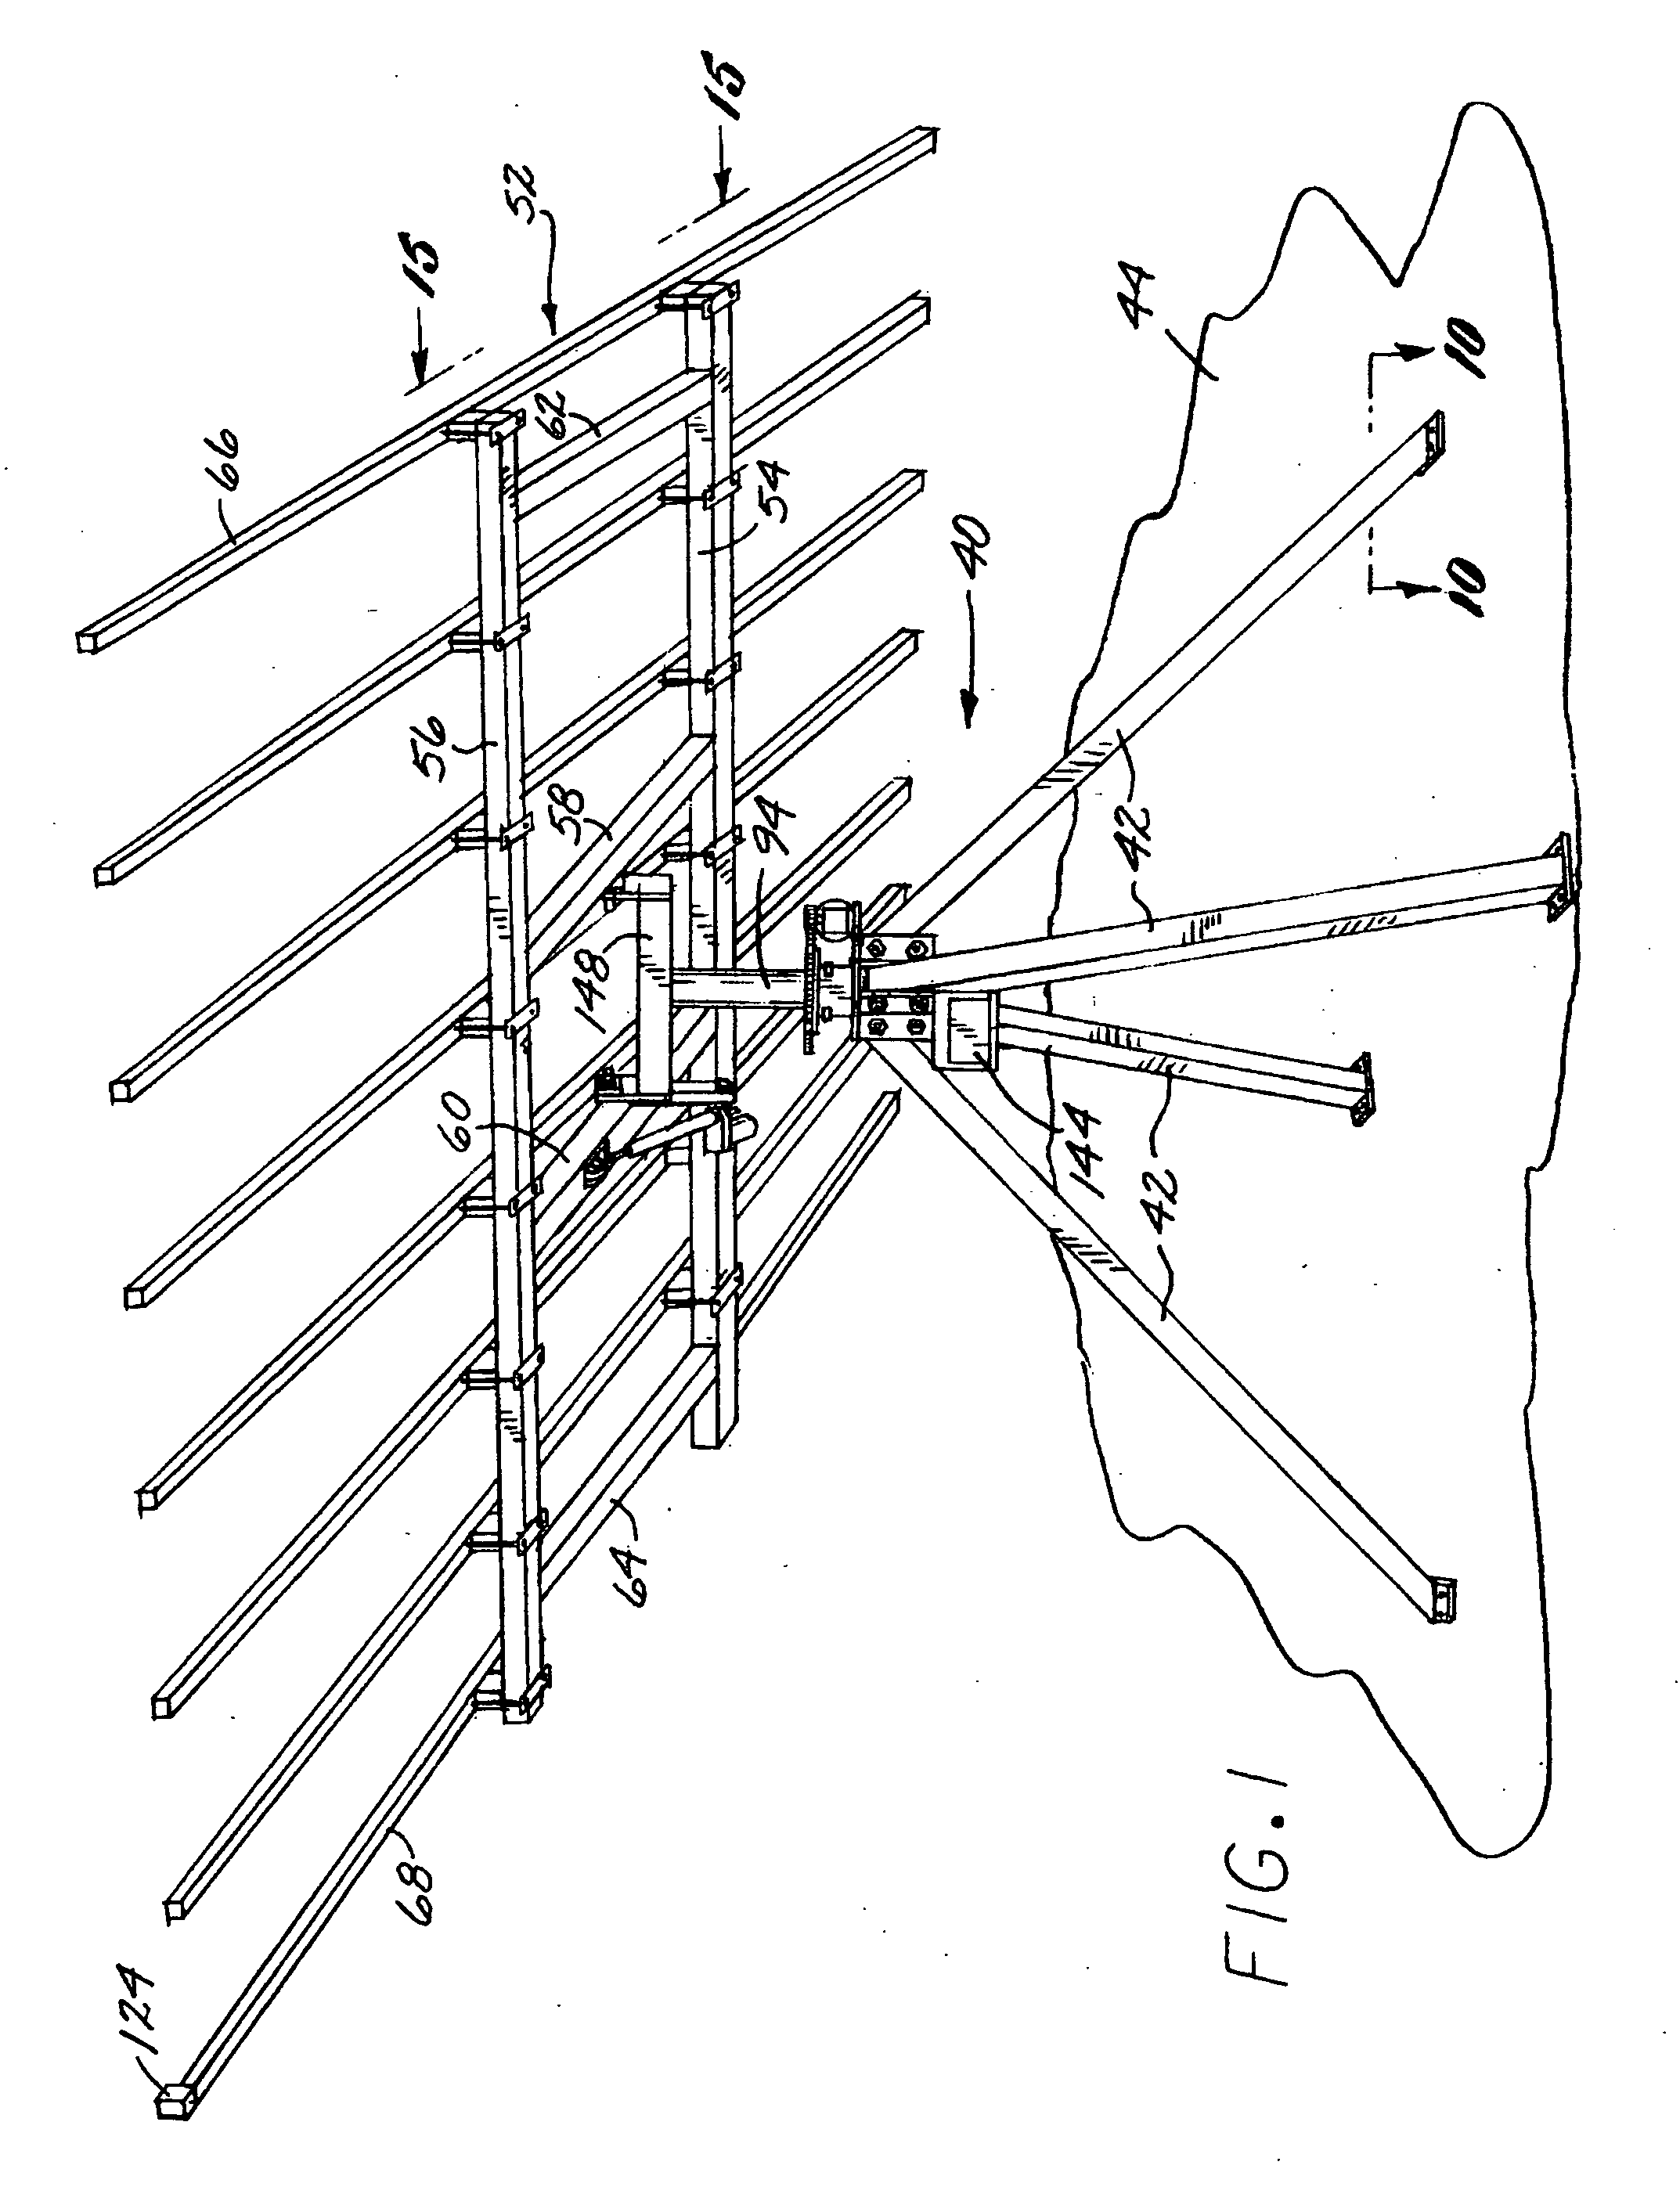 Balanced support and solar tracking system for panels of photovoltaic cells